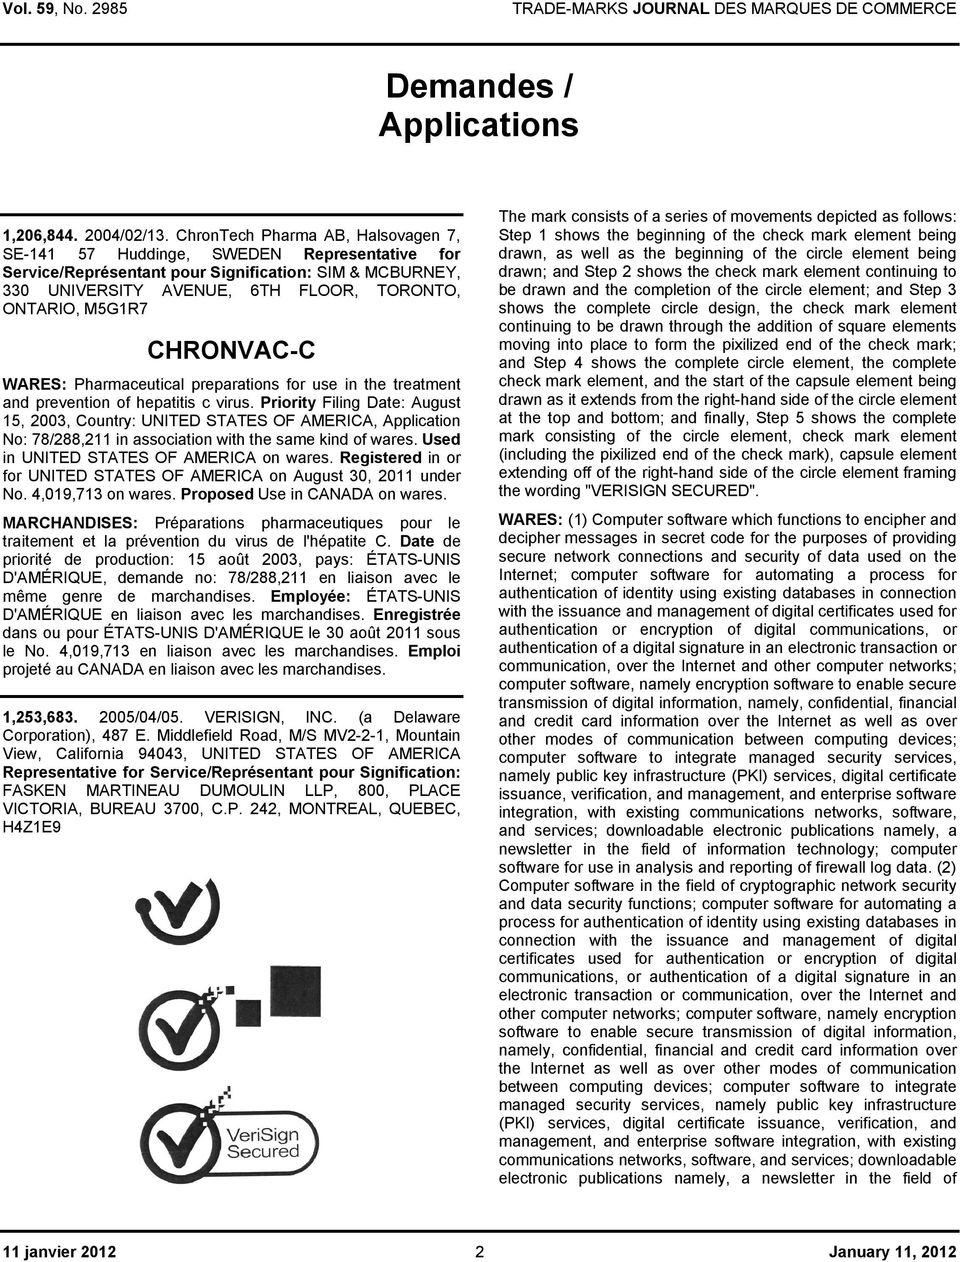 CHRONVAC-C WARES: Pharmaceutical preparations for use in the treatment and prevention of hepatitis c virus.